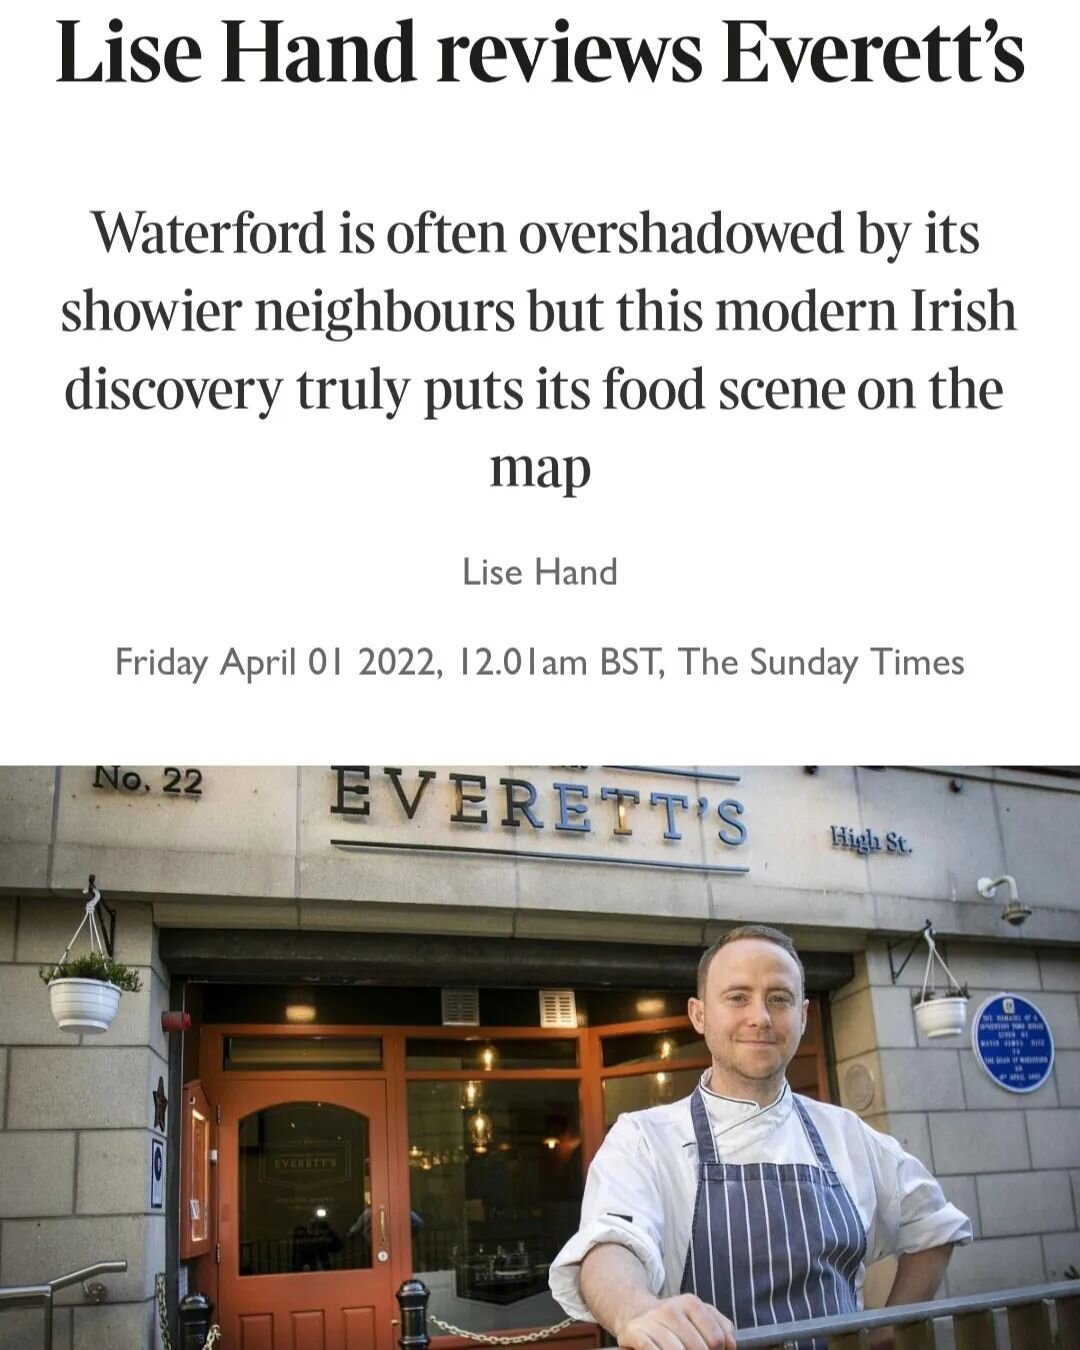 It's our 4th birthday weekend and this is a perfect way to start! Thank you to Lise Hand for her review in the this weekend's Times 

https://www.thetimes.co.uk/article/lise-hand-reviews-everett-s-ljhpgdx6h

#Waterford #happybirthday